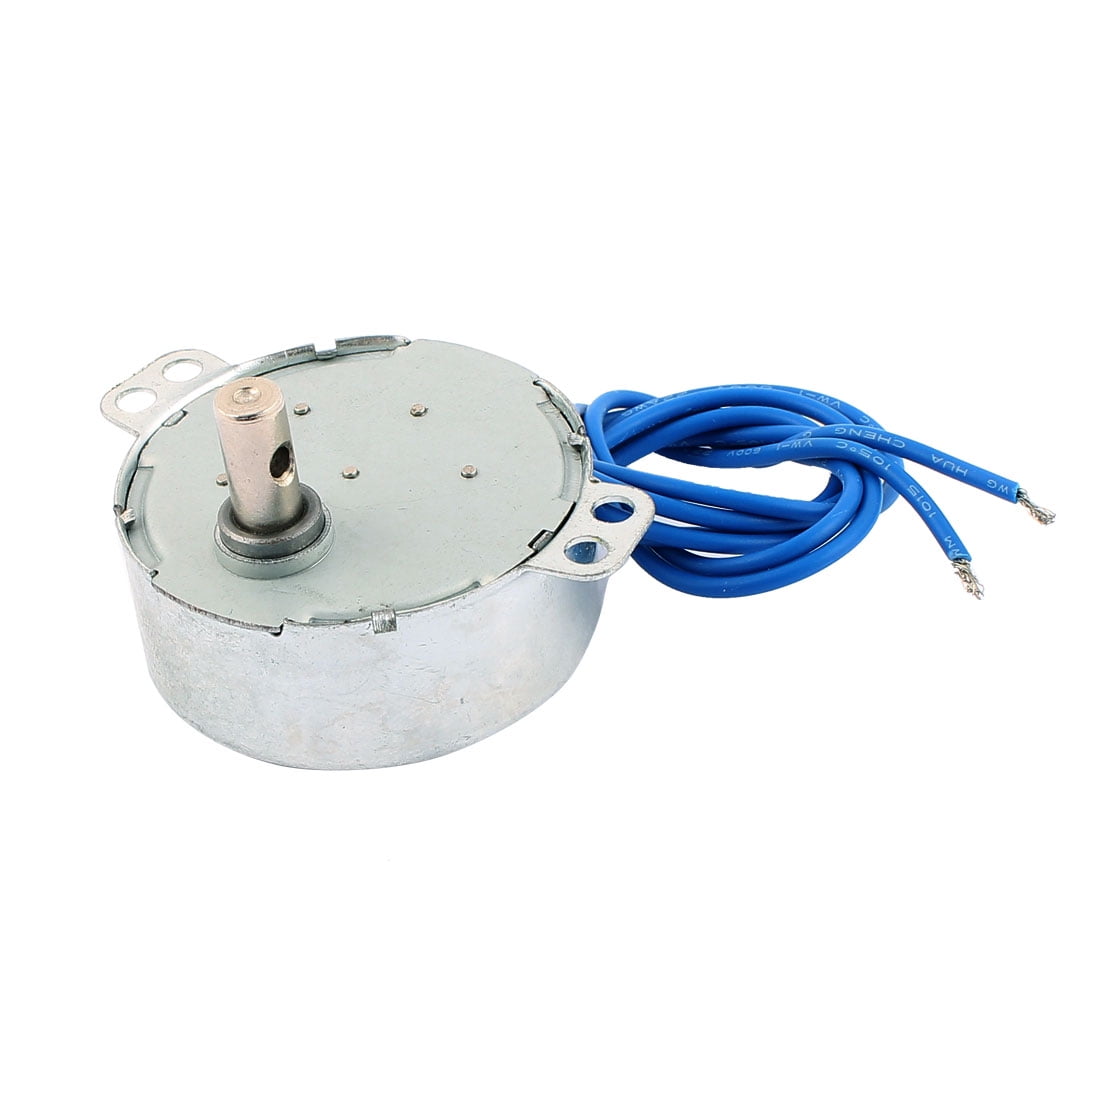 Electric synchronous motor AC24V 5-6RPM 50-60Hz CW-Direction Hand- Model guiding Motor 